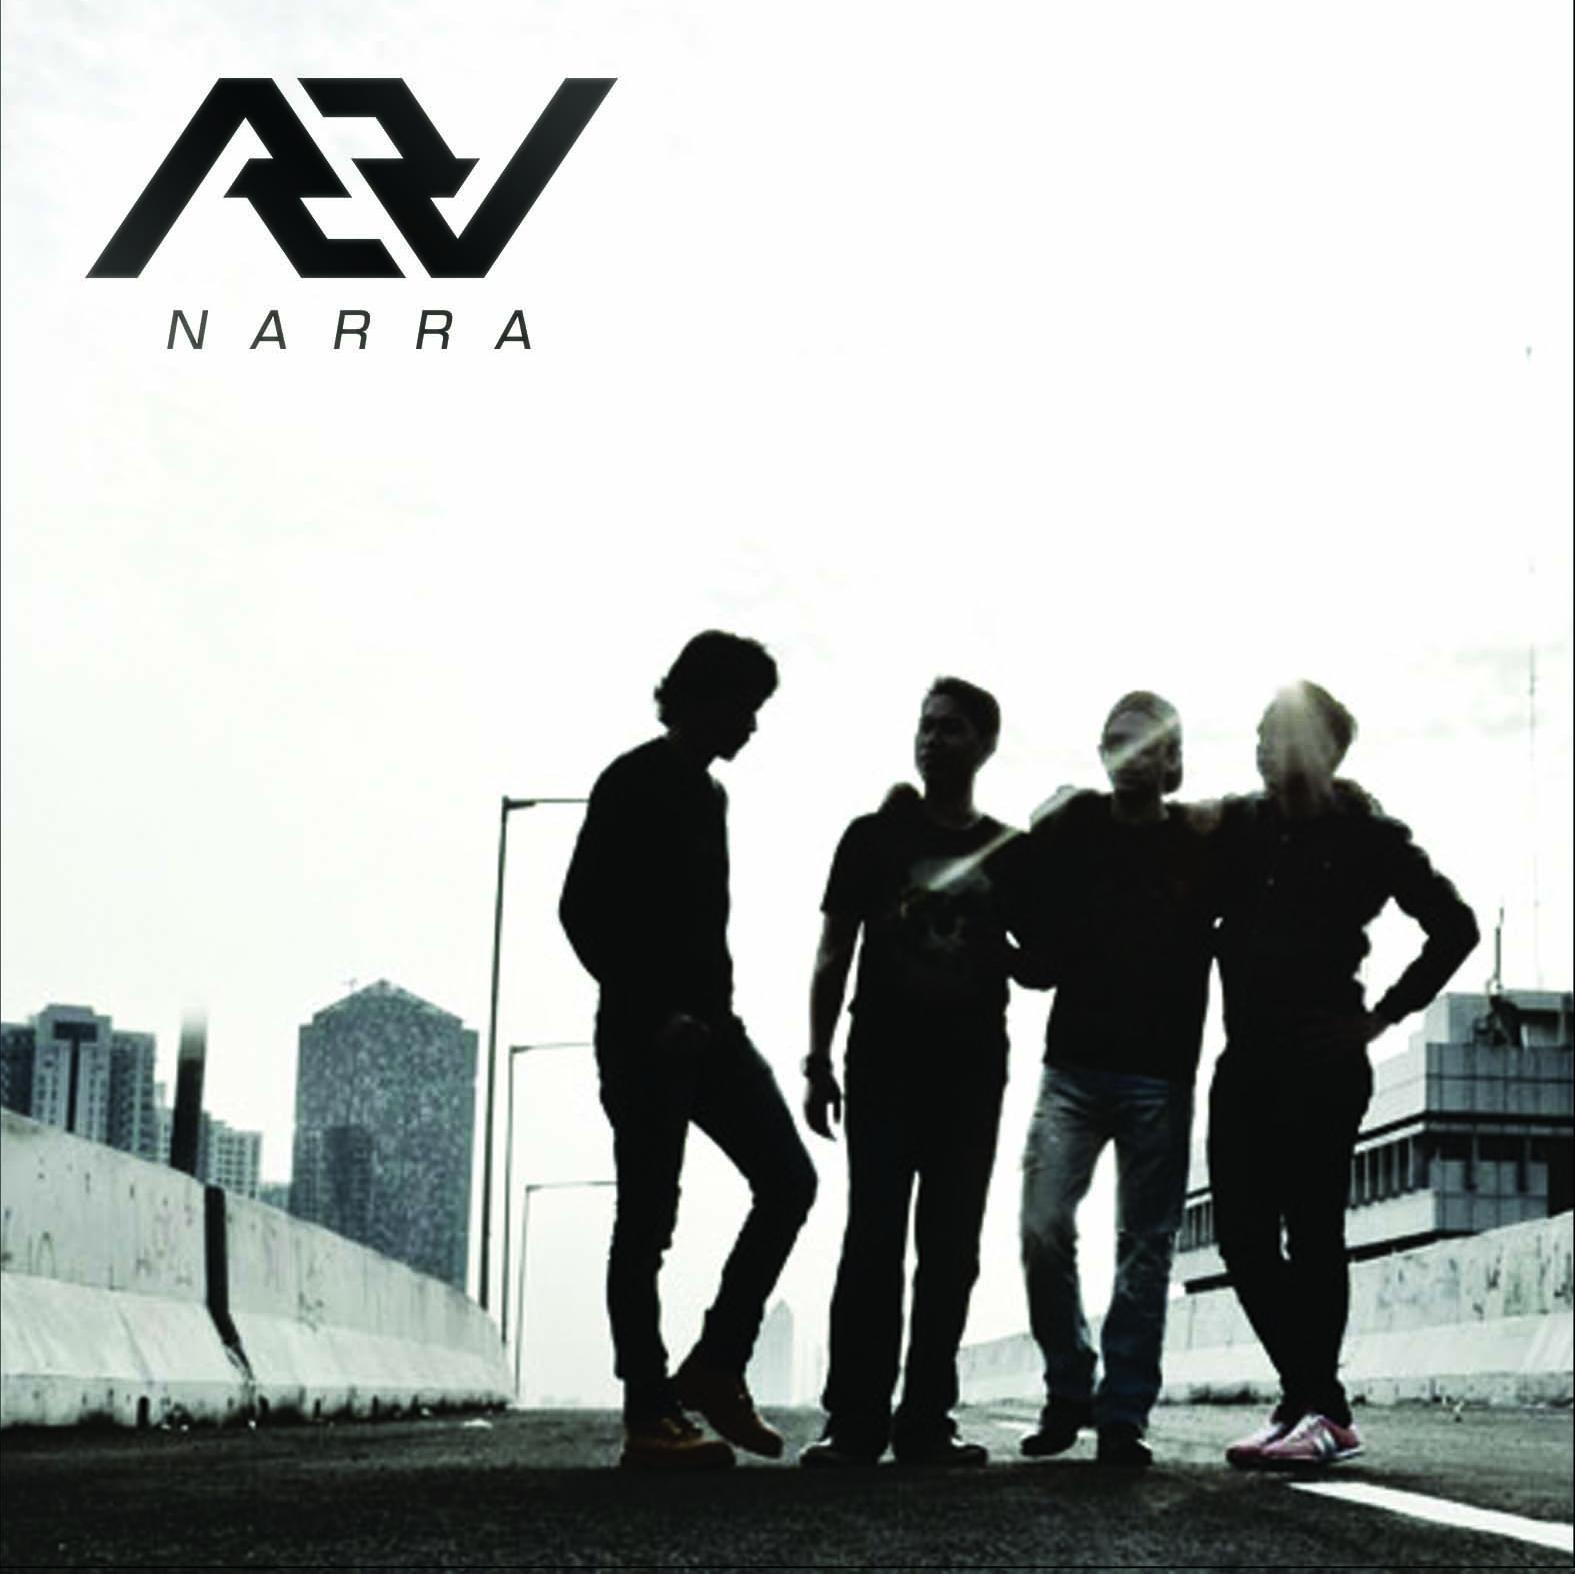 Official Twitter of NARRA, an Indonesian alternative pop/rock band. Vocal&Guitar @JedSastra, Guitar @Rob_iBob, Drum @_LuckyPerdana, Synthesizer @tHe_aHduy